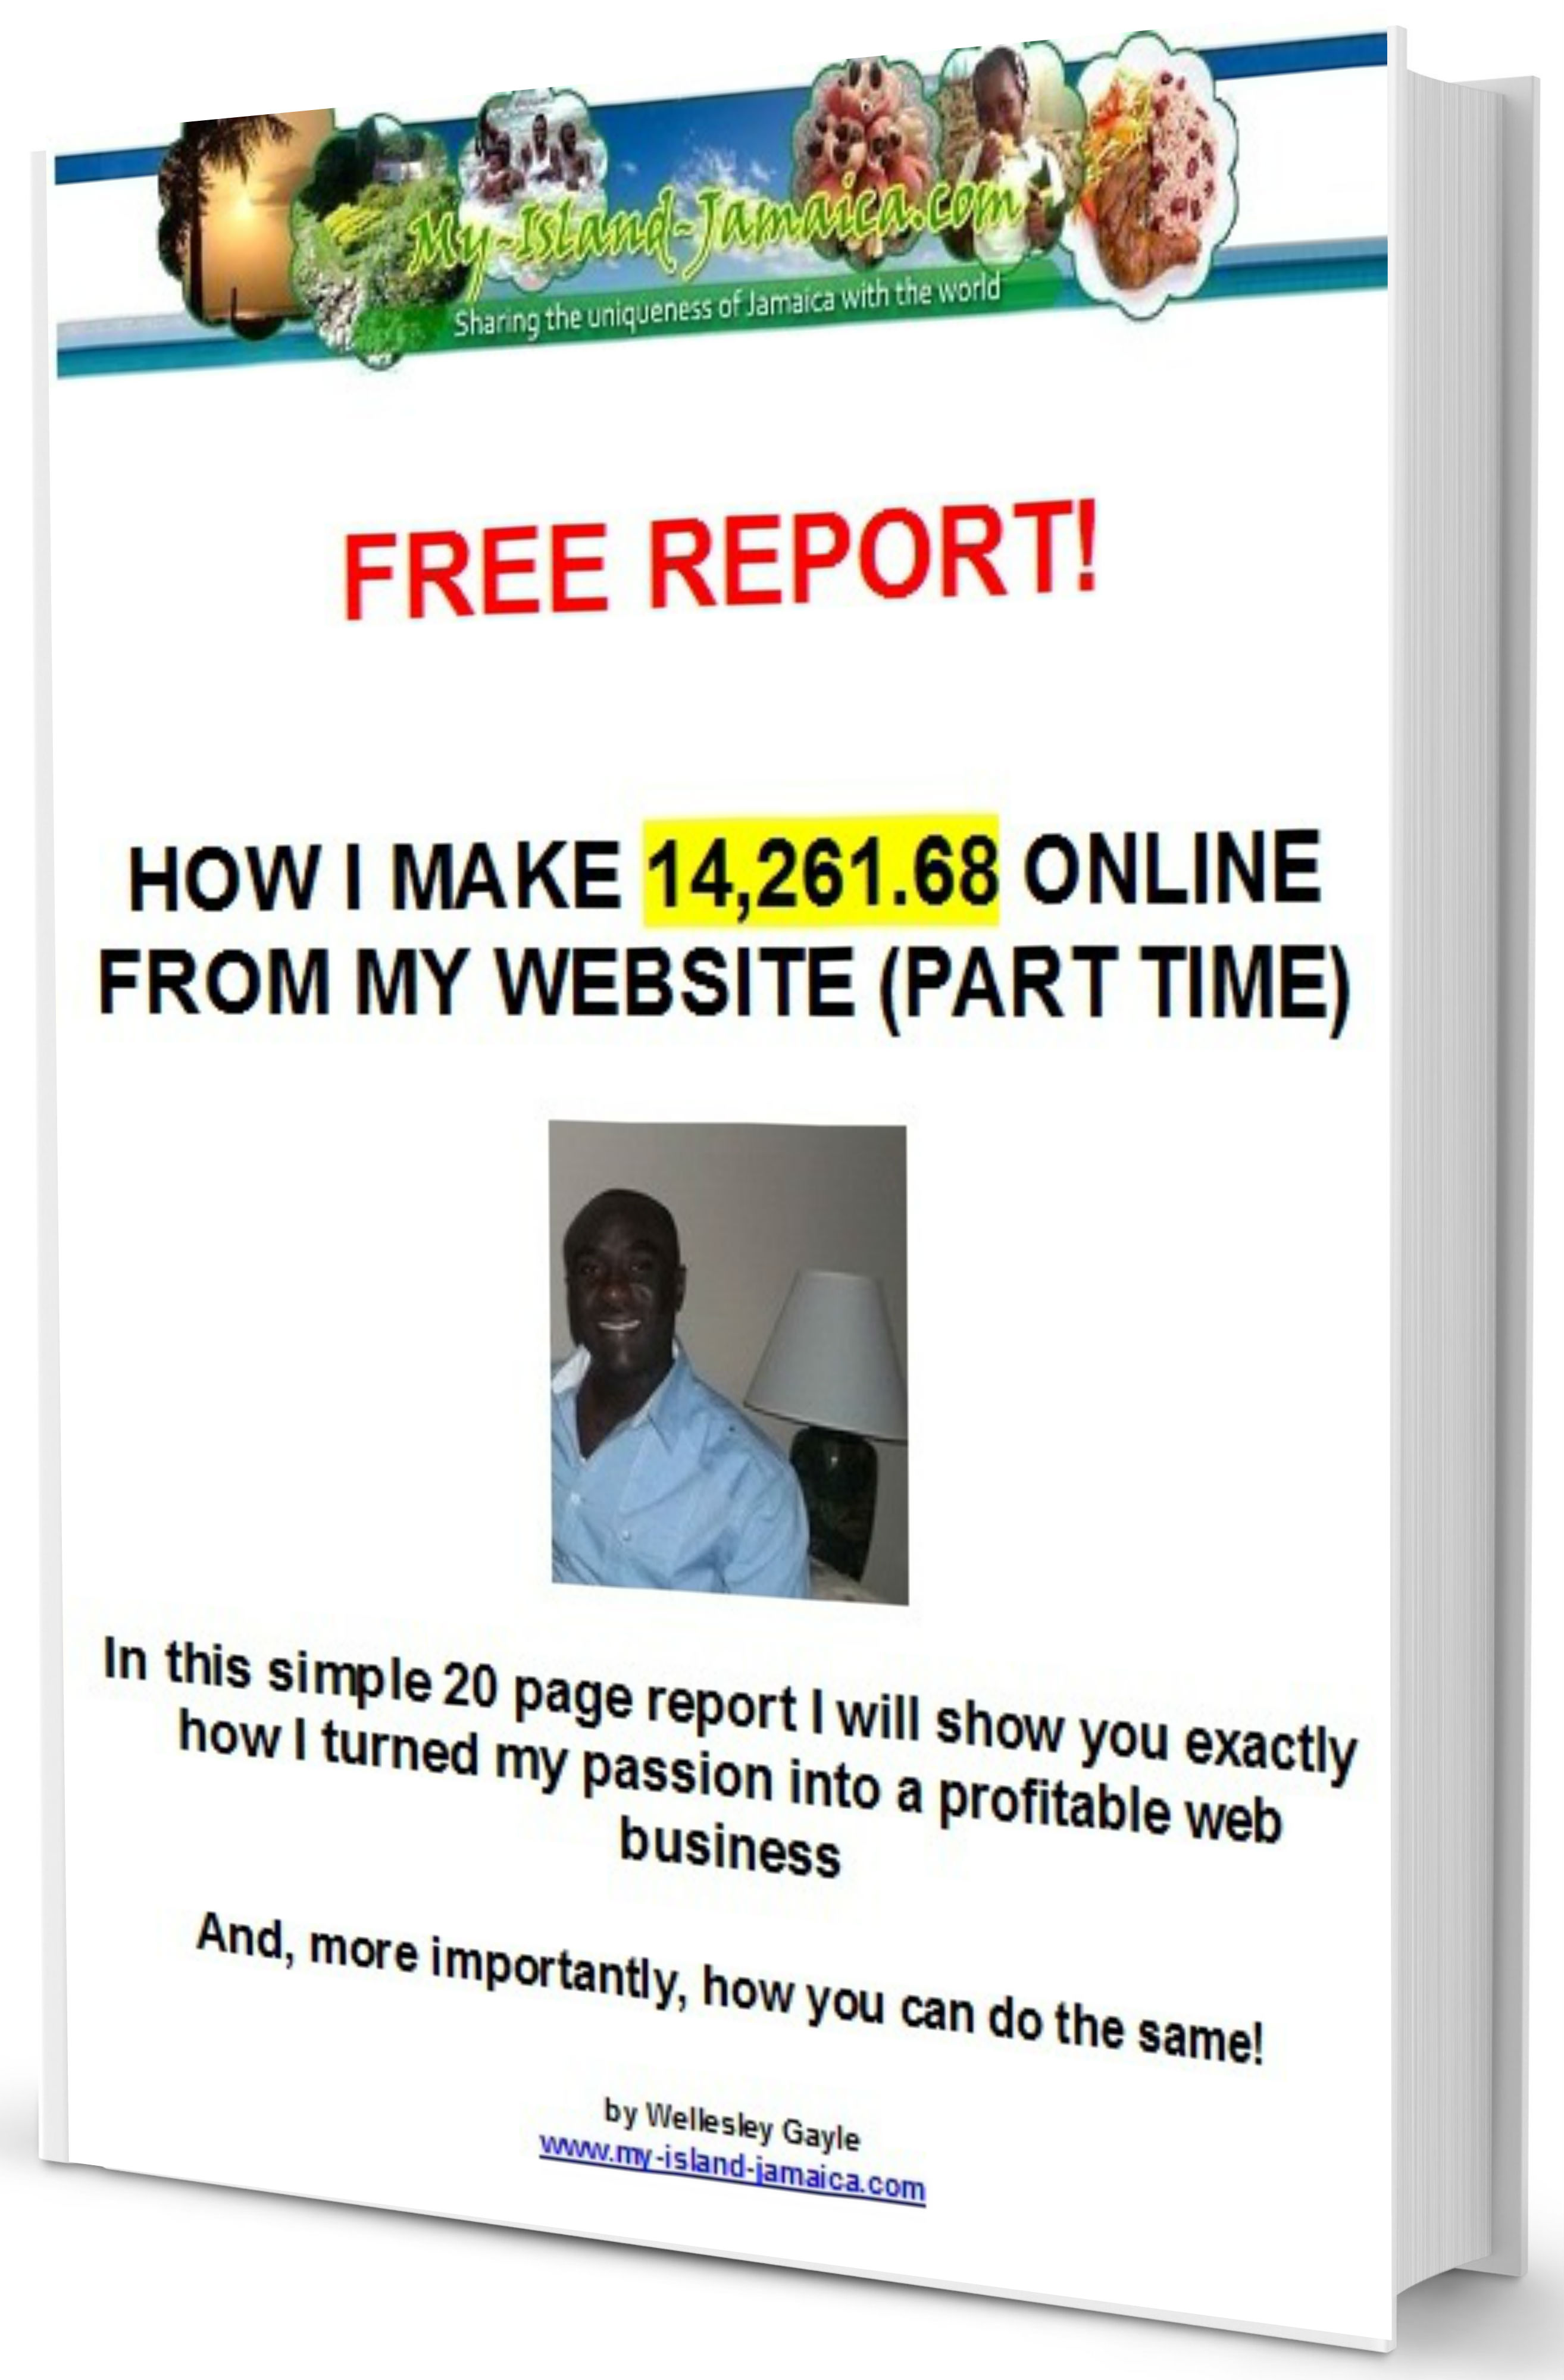 THE FREE REPORT